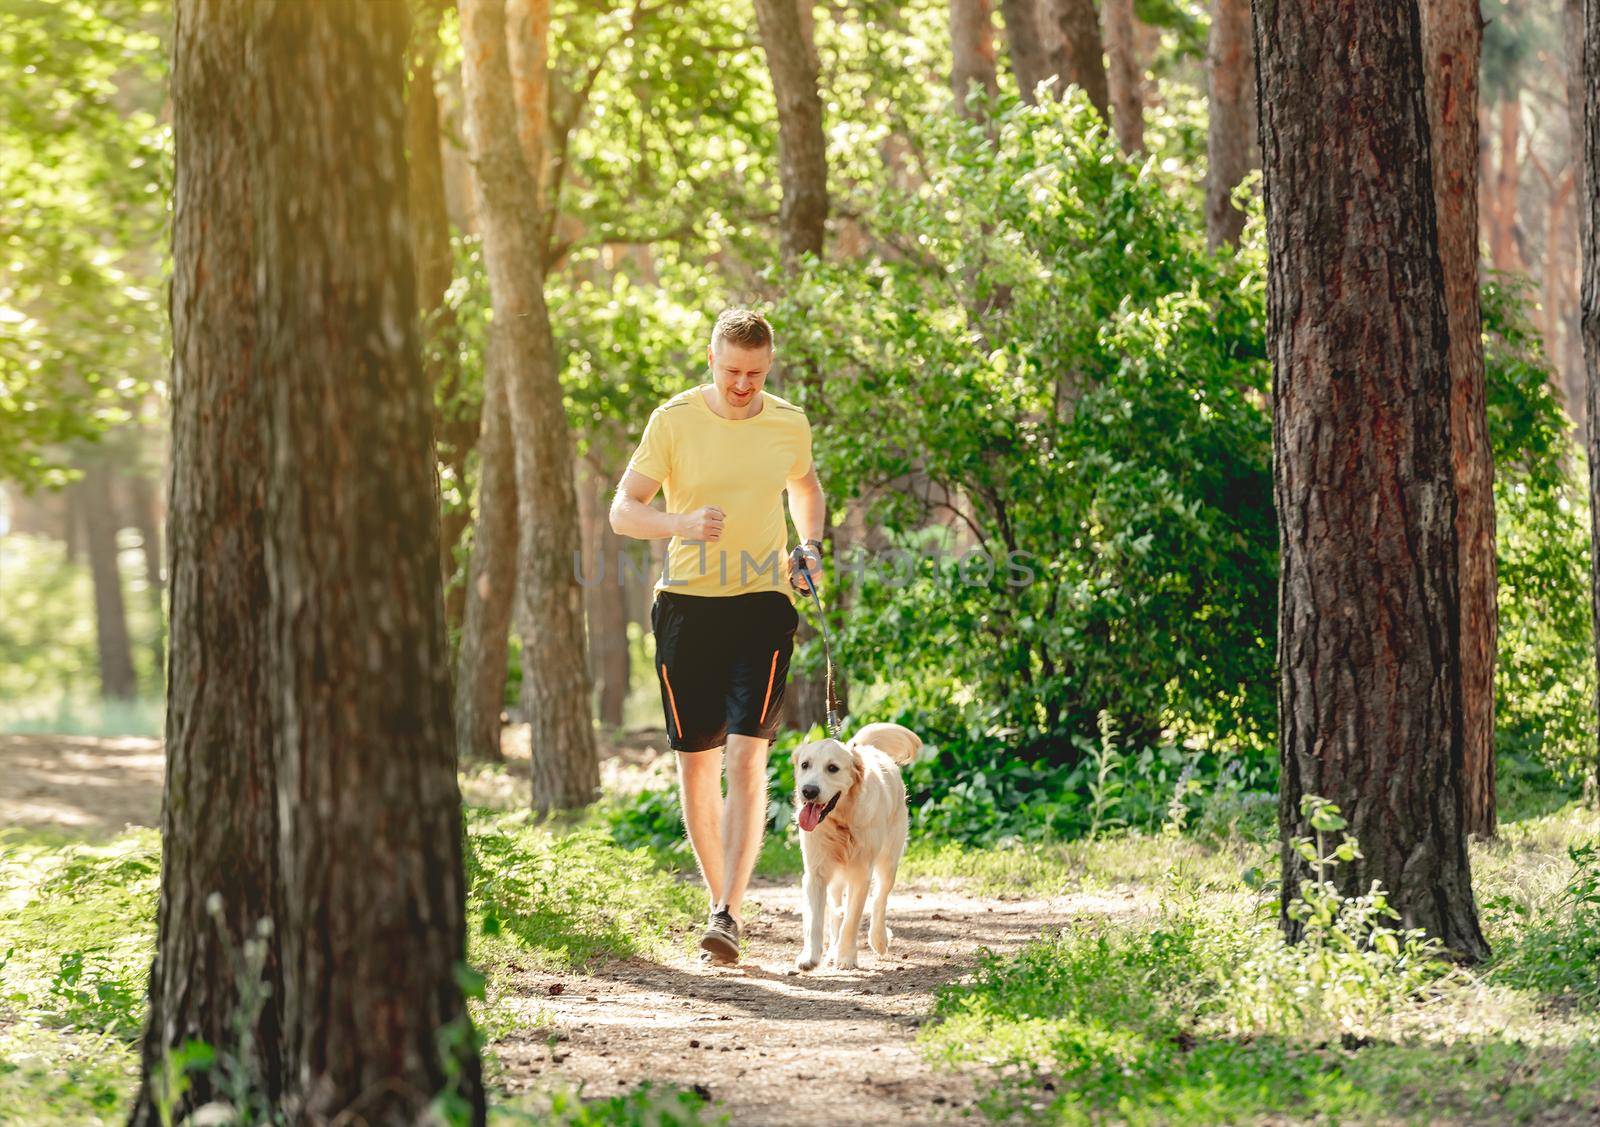 Man jogging with dog in wood by tan4ikk1